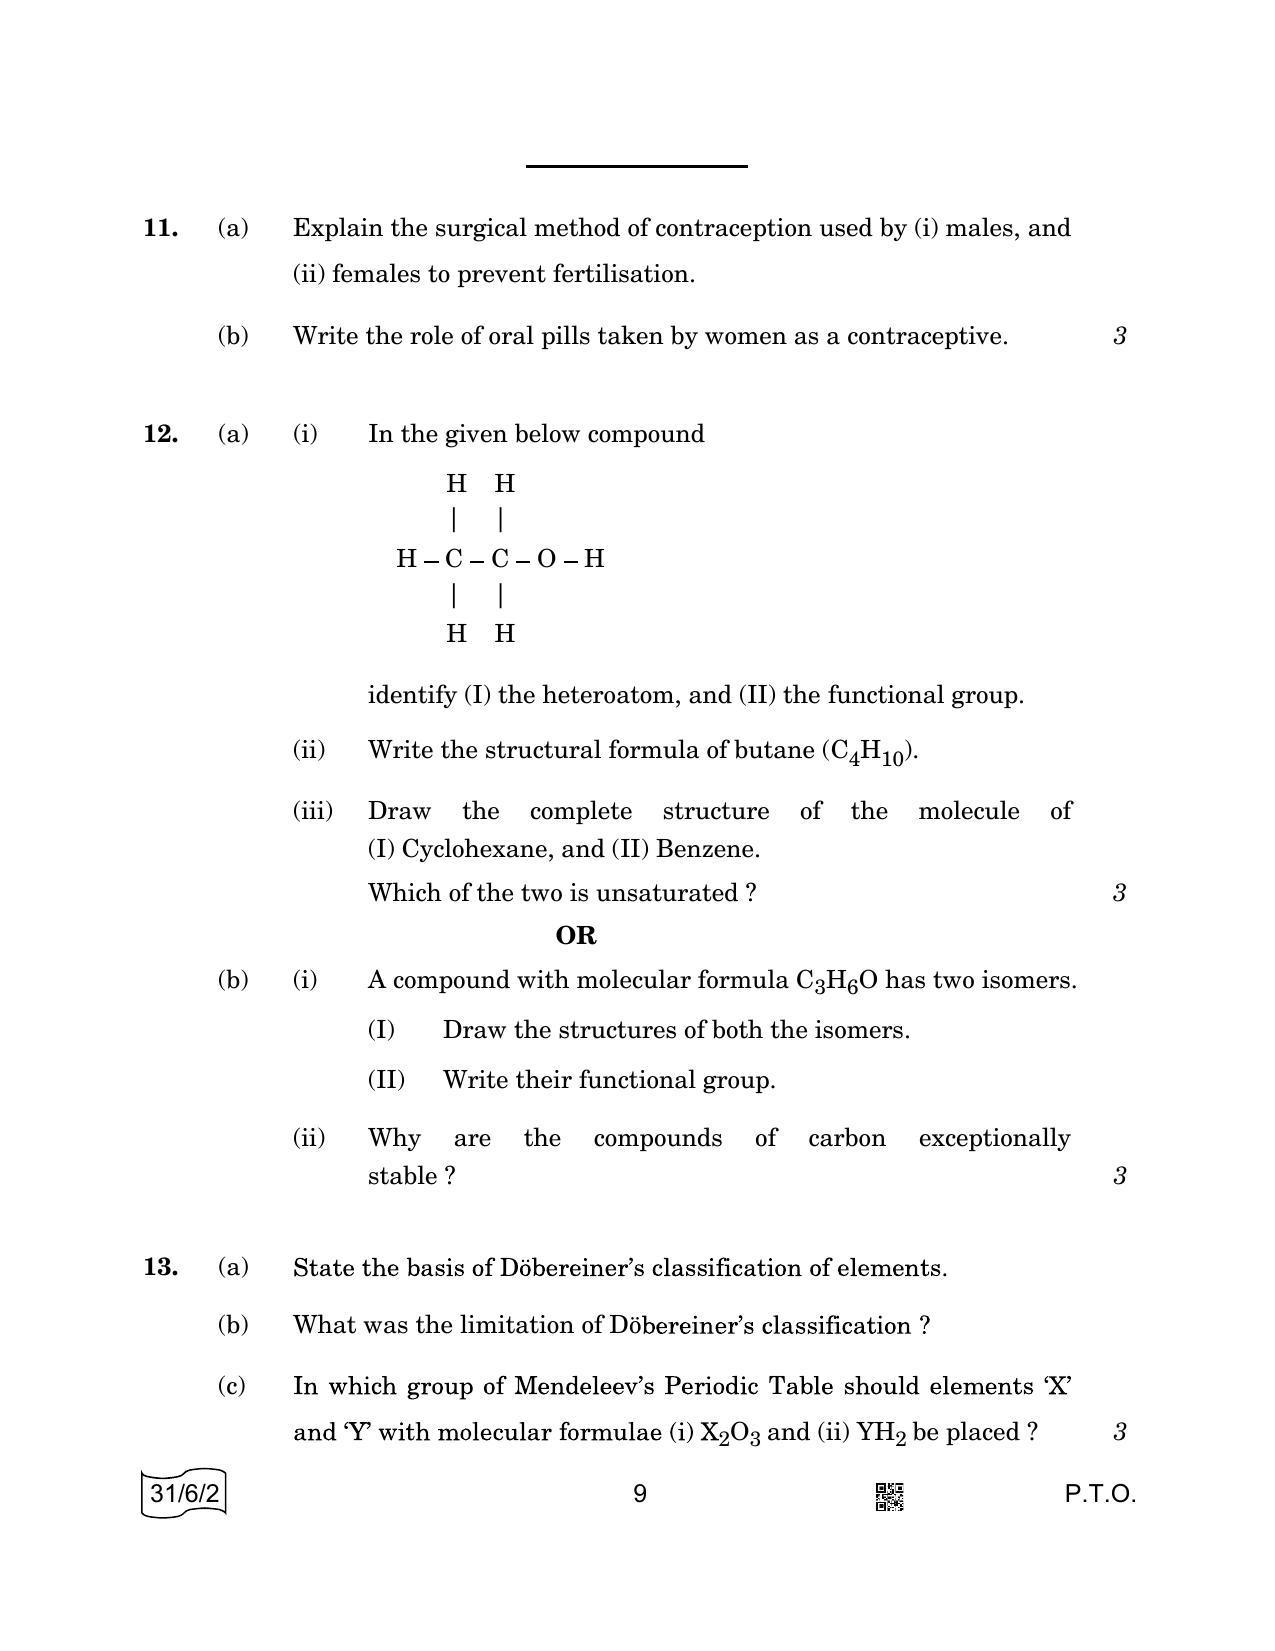 CBSE Class 10 31-6-2 SCIENCE 2022 Compartment Question Paper - Page 9